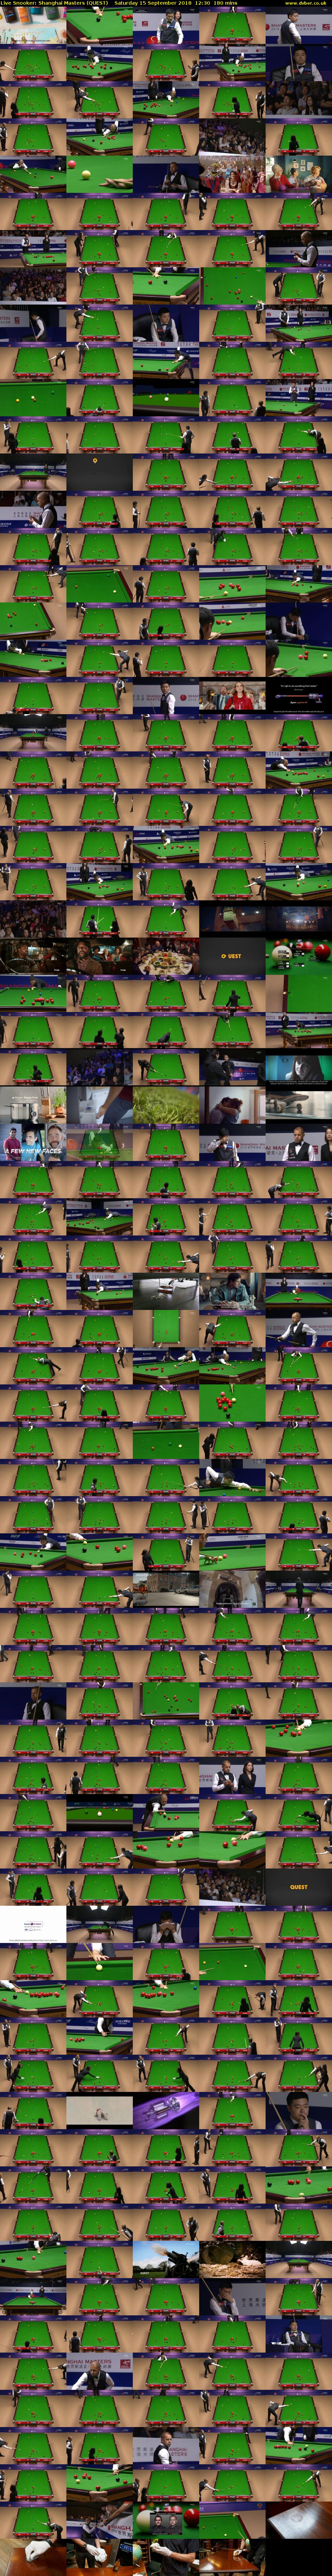 Live Snooker: Shanghai Masters (QUEST) Saturday 15 September 2018 12:30 - 15:30